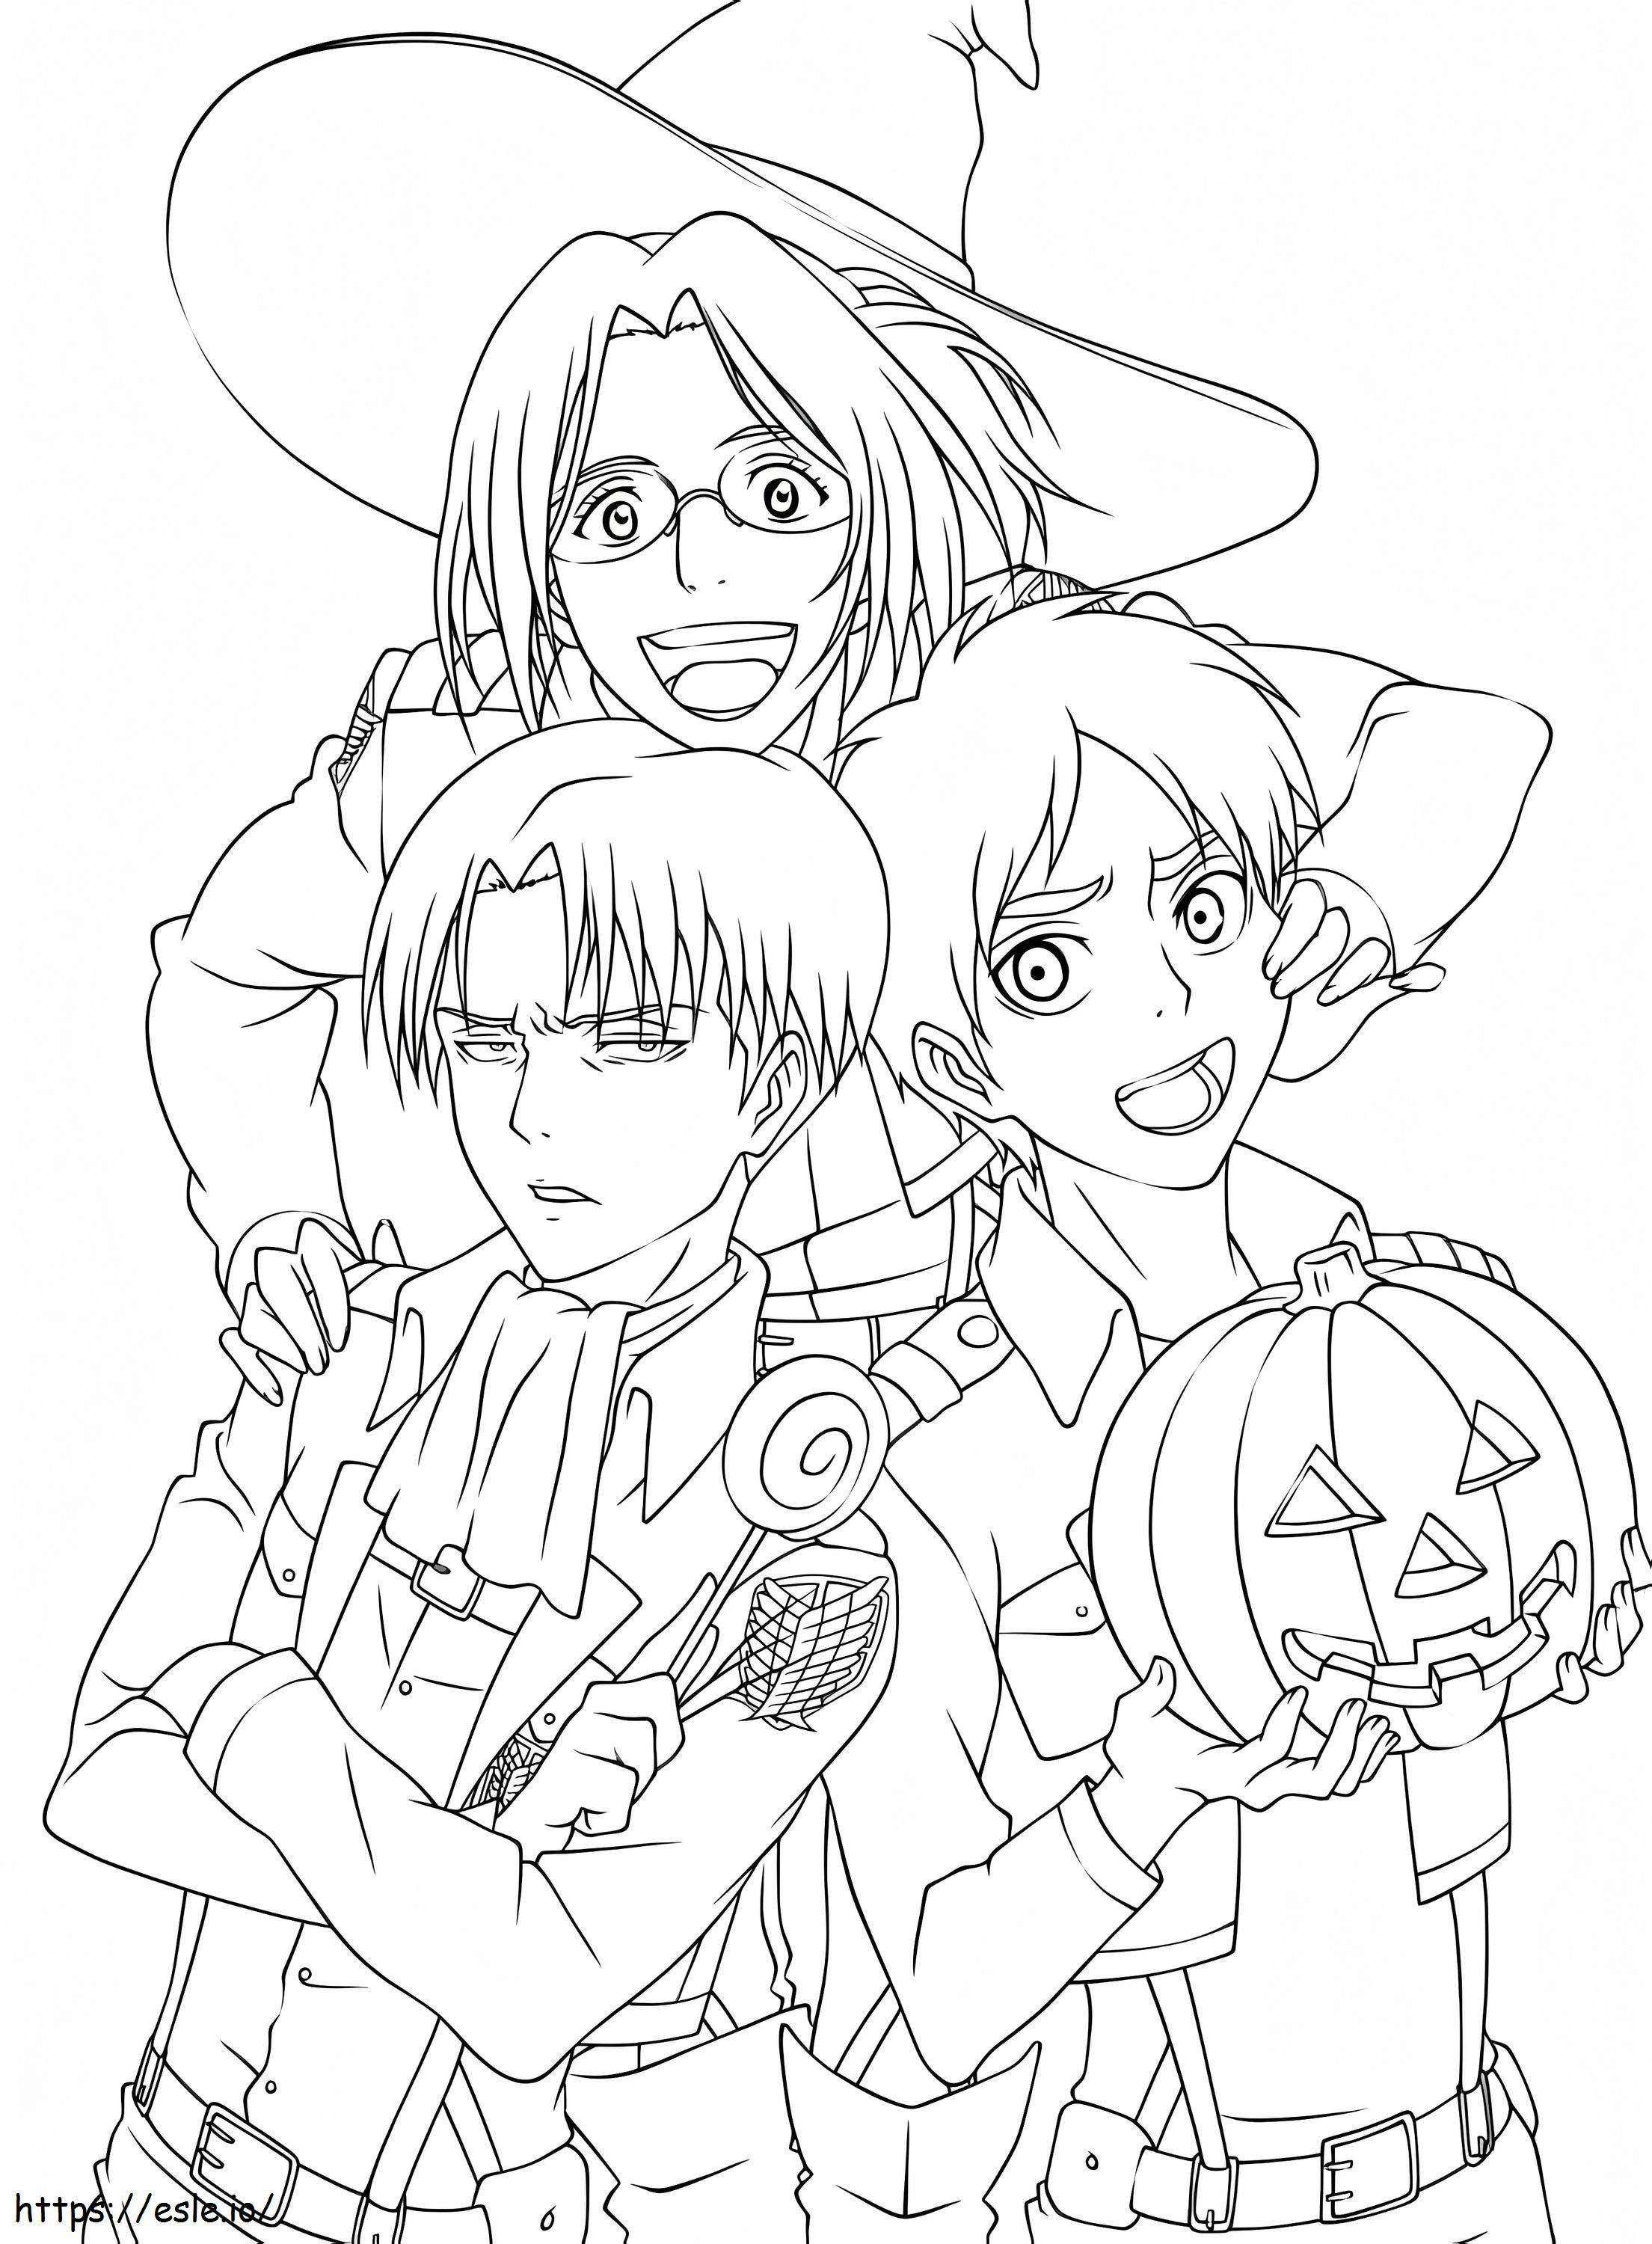 Hange With Eren And Levi coloring page